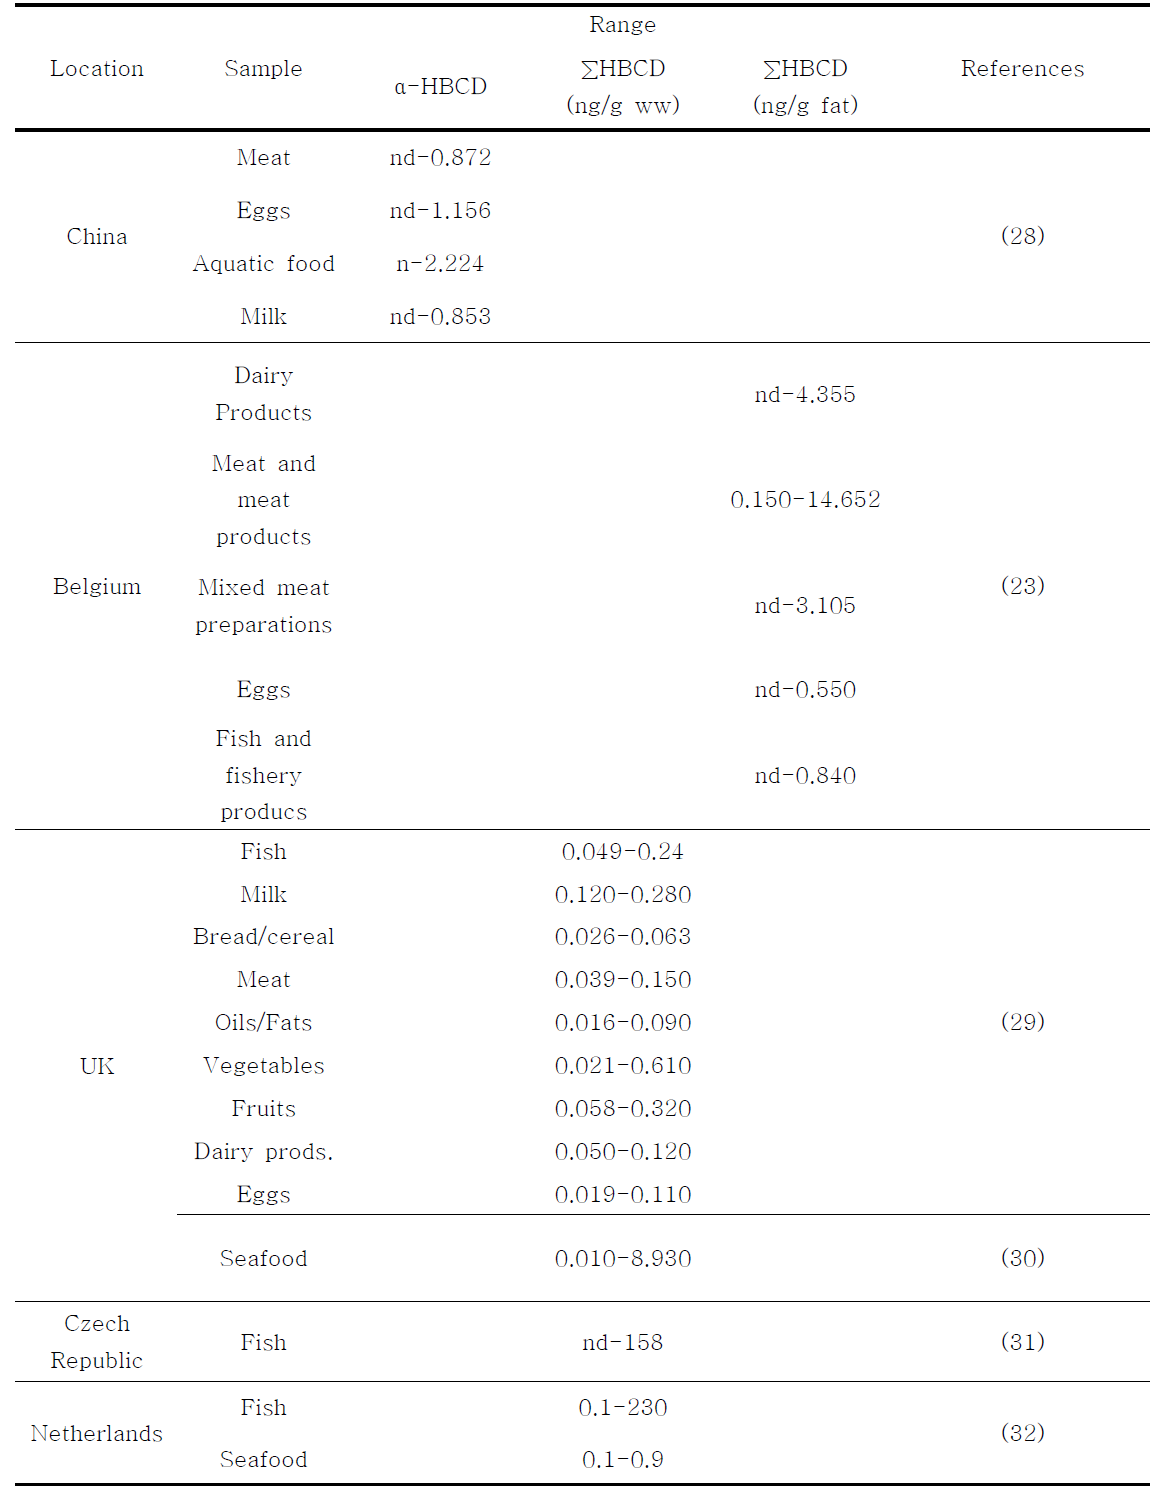 Levels of HBCDs in foodstuff (ng/g fat or ng/g wet weight) reported in the literature from different countries.